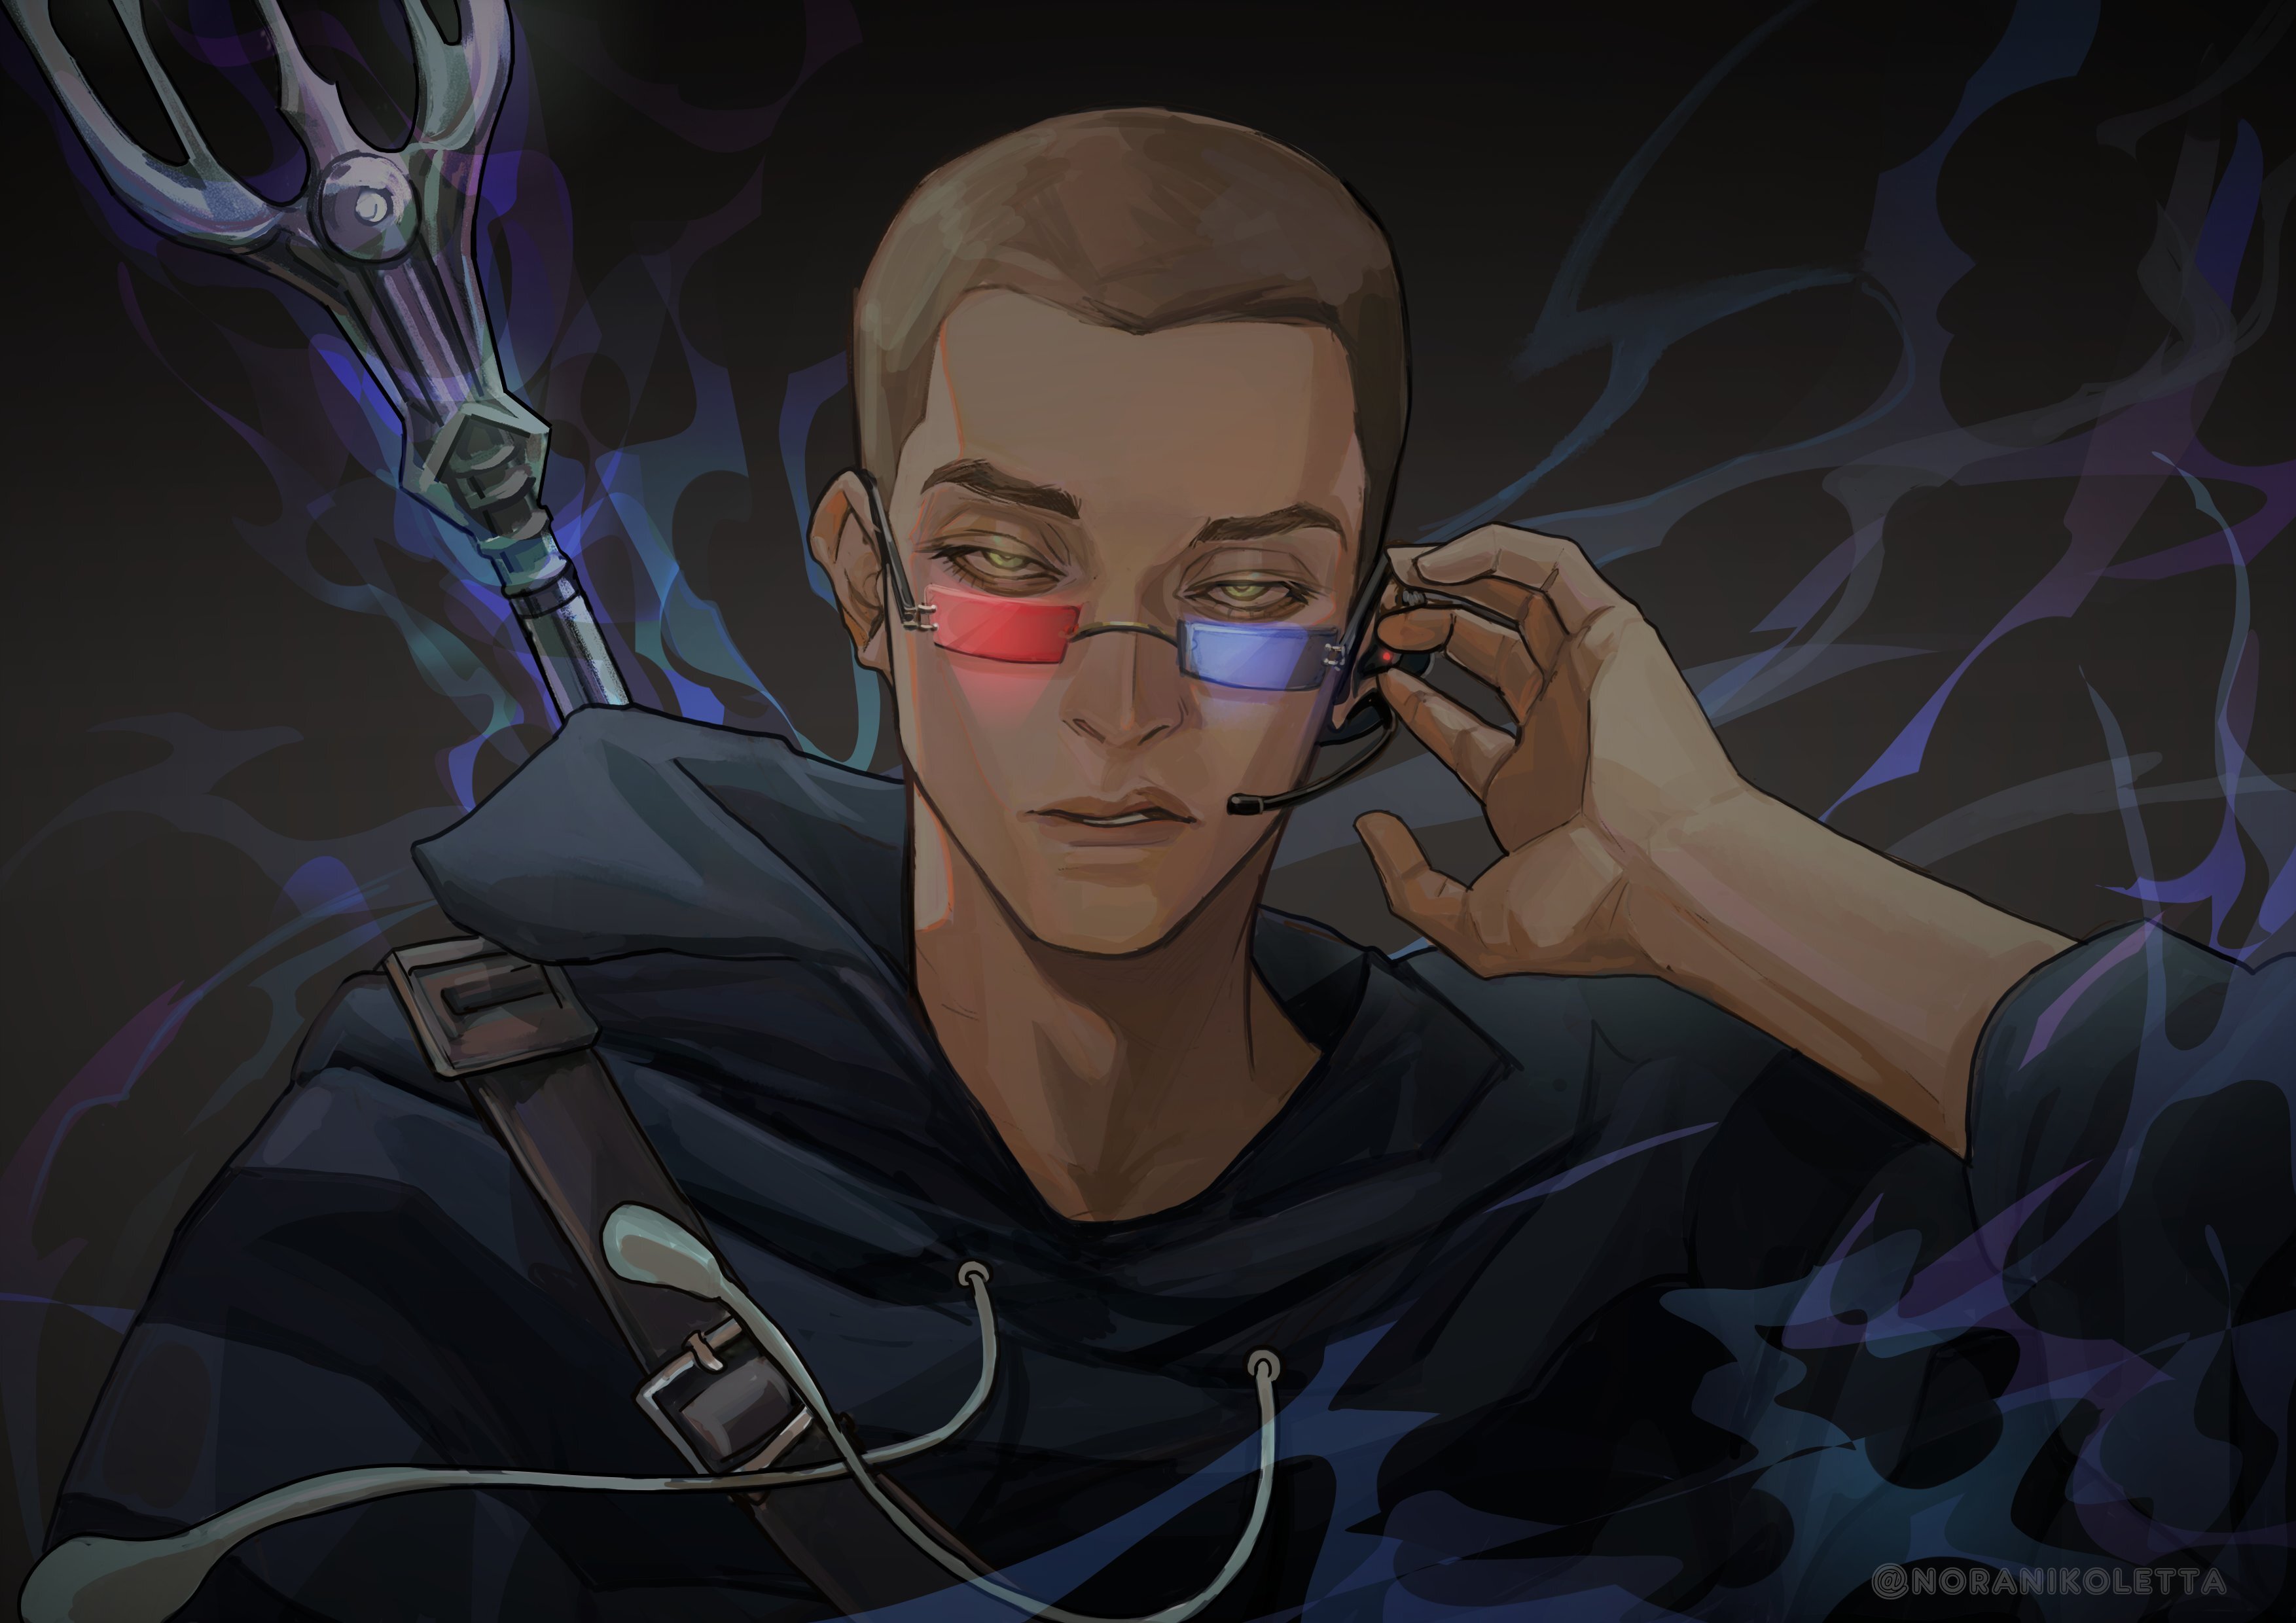 This is a drawing of Jack from the shoulders up. He is posed facing the camera with a focused look to his face. He's wearing an earpiece instead of his headset, making him look like a spy from an early 2000s film. The 3D glasses have been transformed into bifocals with red and blue lenses. He also wears a trident strapped to his back. The background is a simple grey with blue smoky accents.